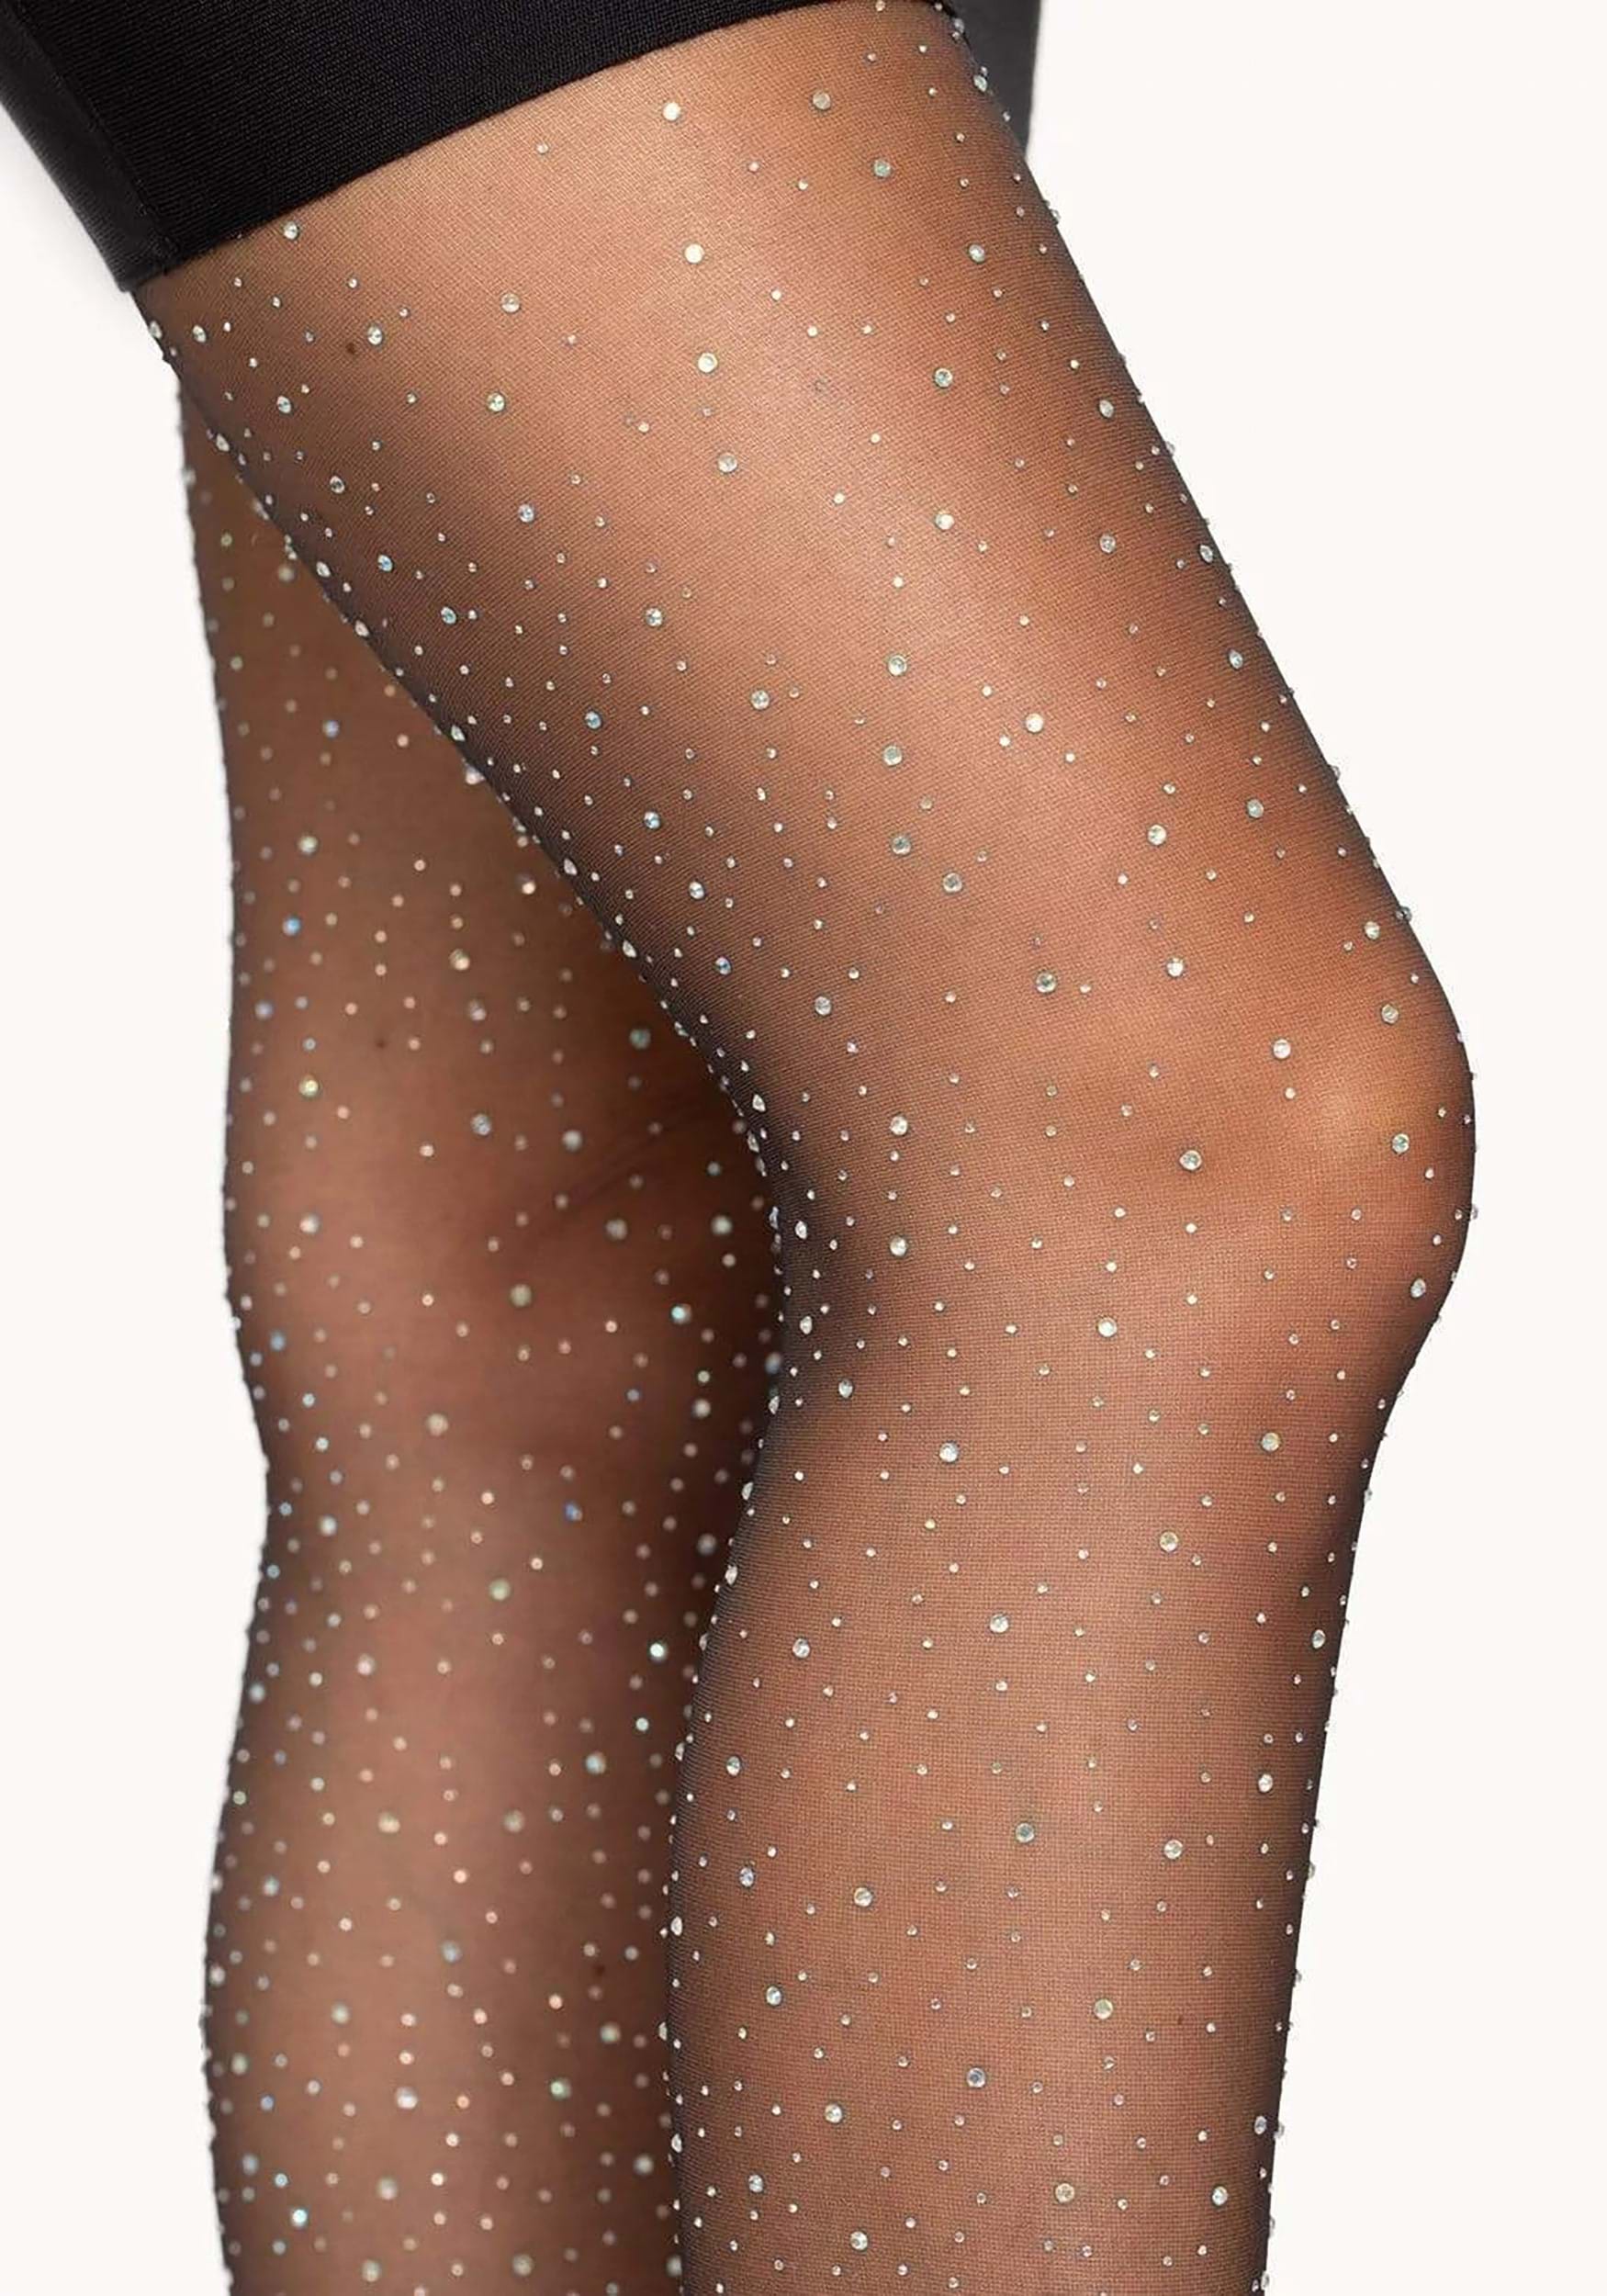 4 Pairs of Women's Stockings Semi Opaque Black Rhinestones Patterned Tights  High Waist Footed Pantyhose for Teen Girls